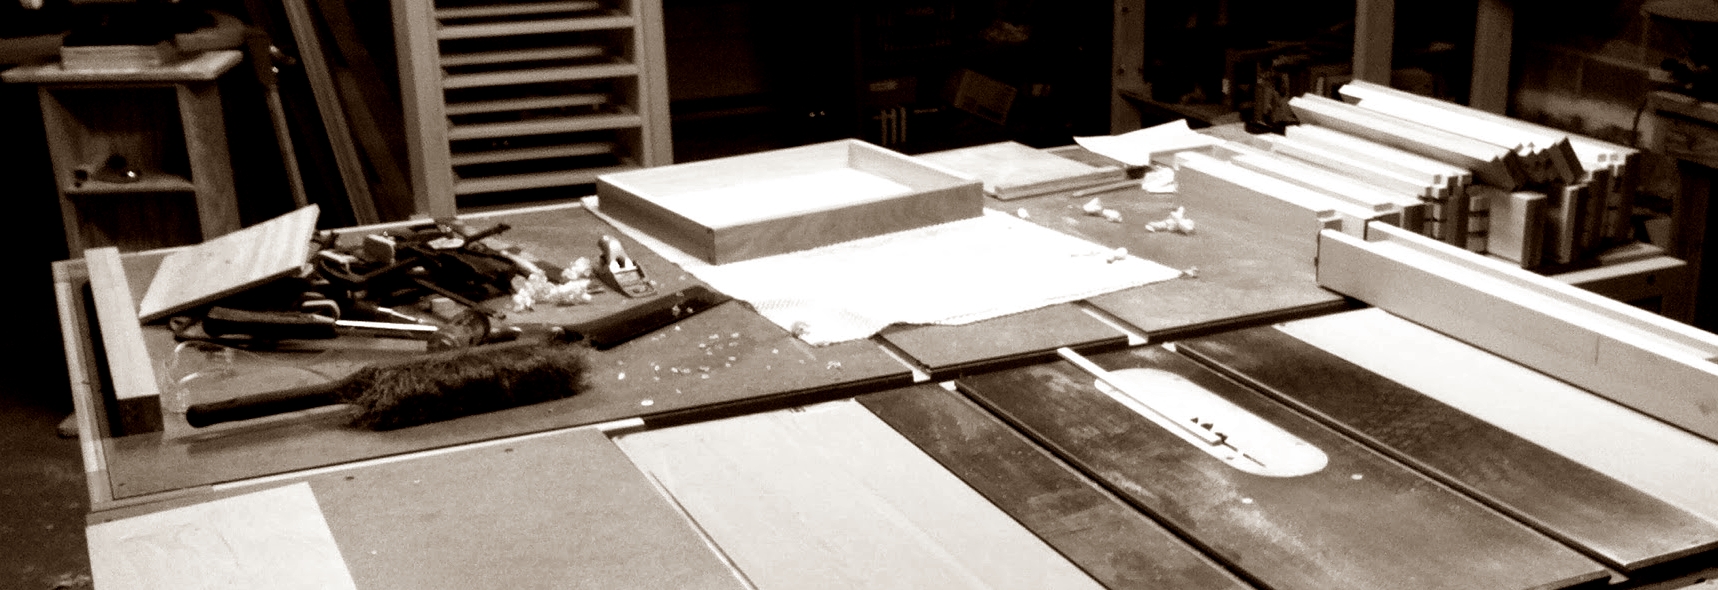 Dovetail work area, on my outfeed table